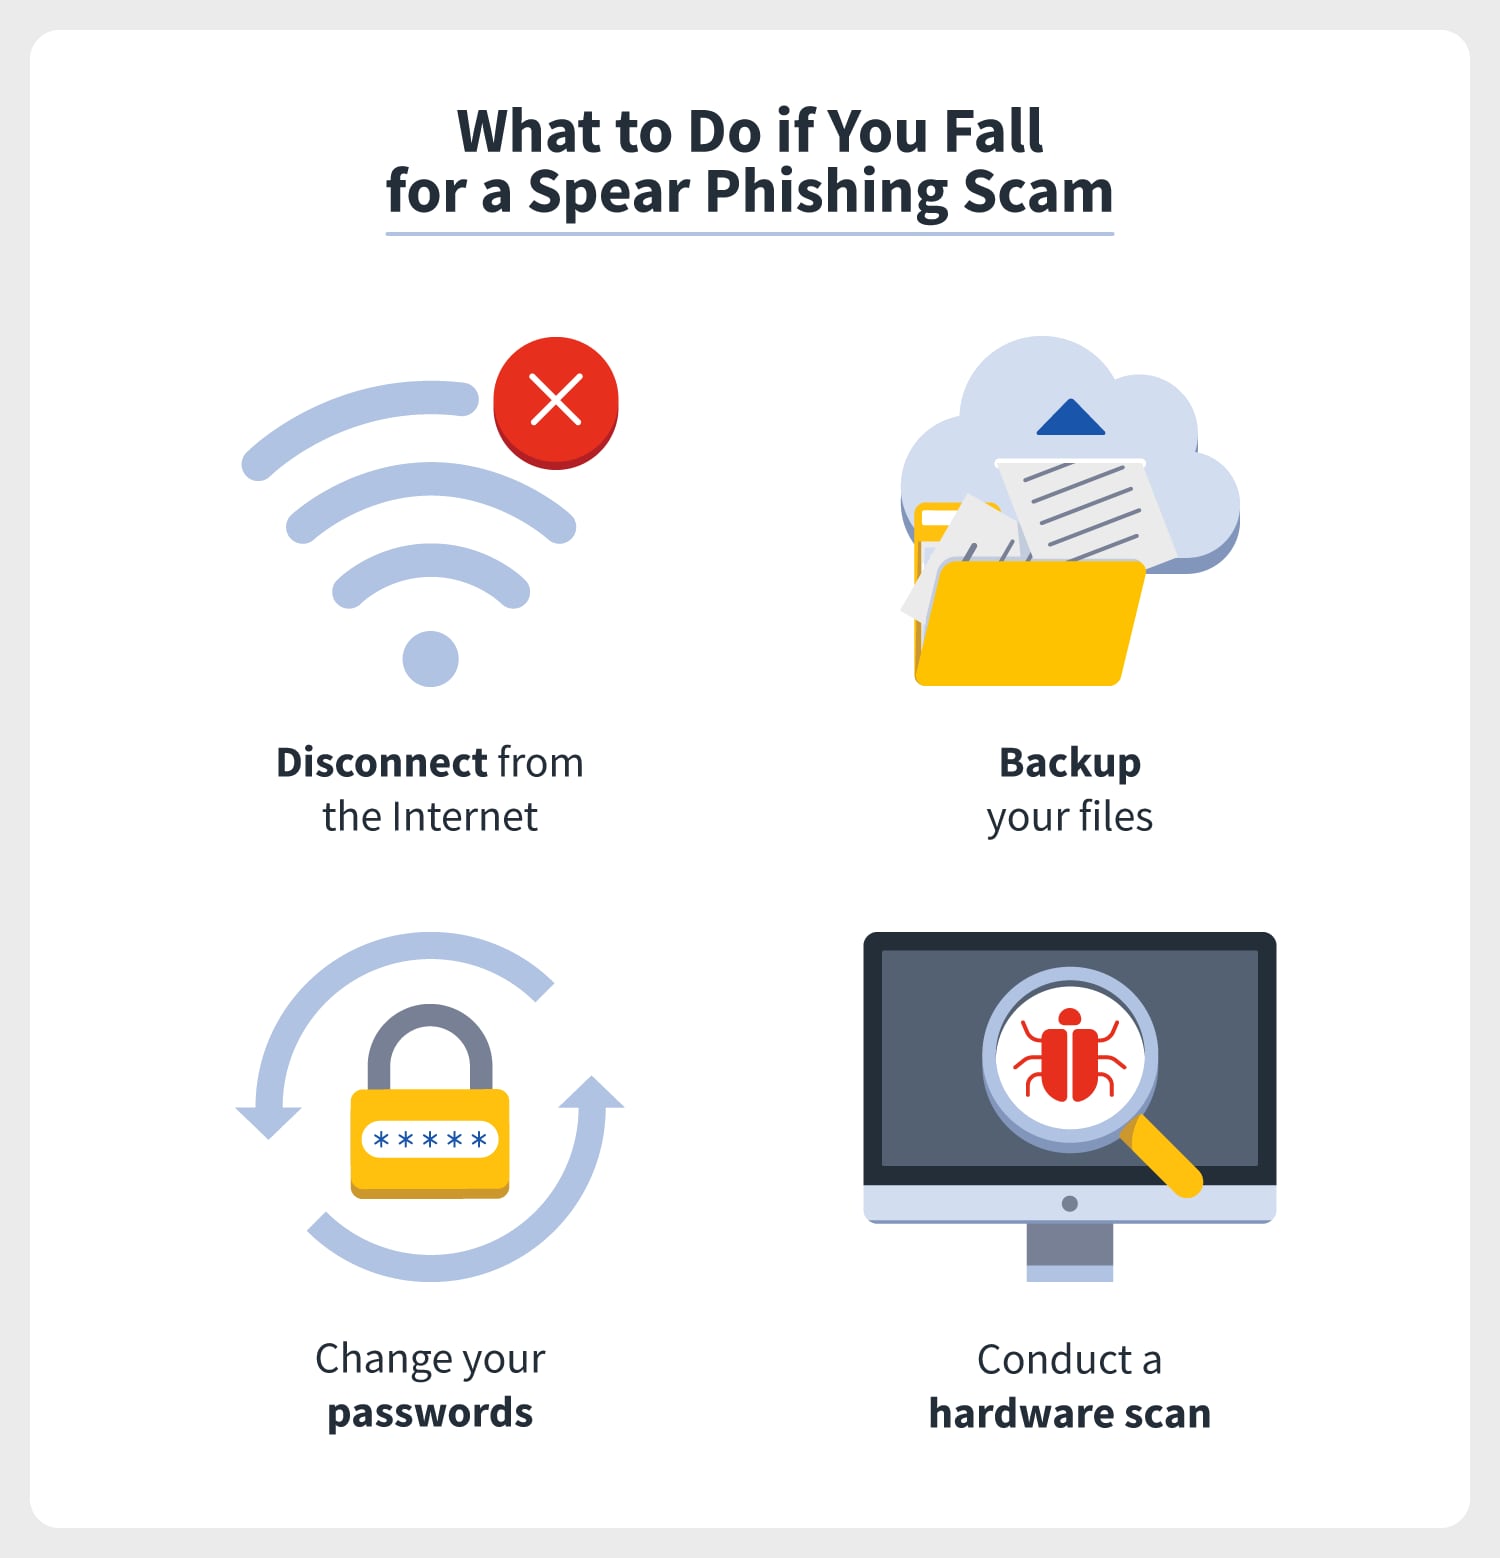 an internet signal, file full of documents, padlock, and magnifying glass over a bug all represent the steps you should take if you fall victim to a spear phishing scam